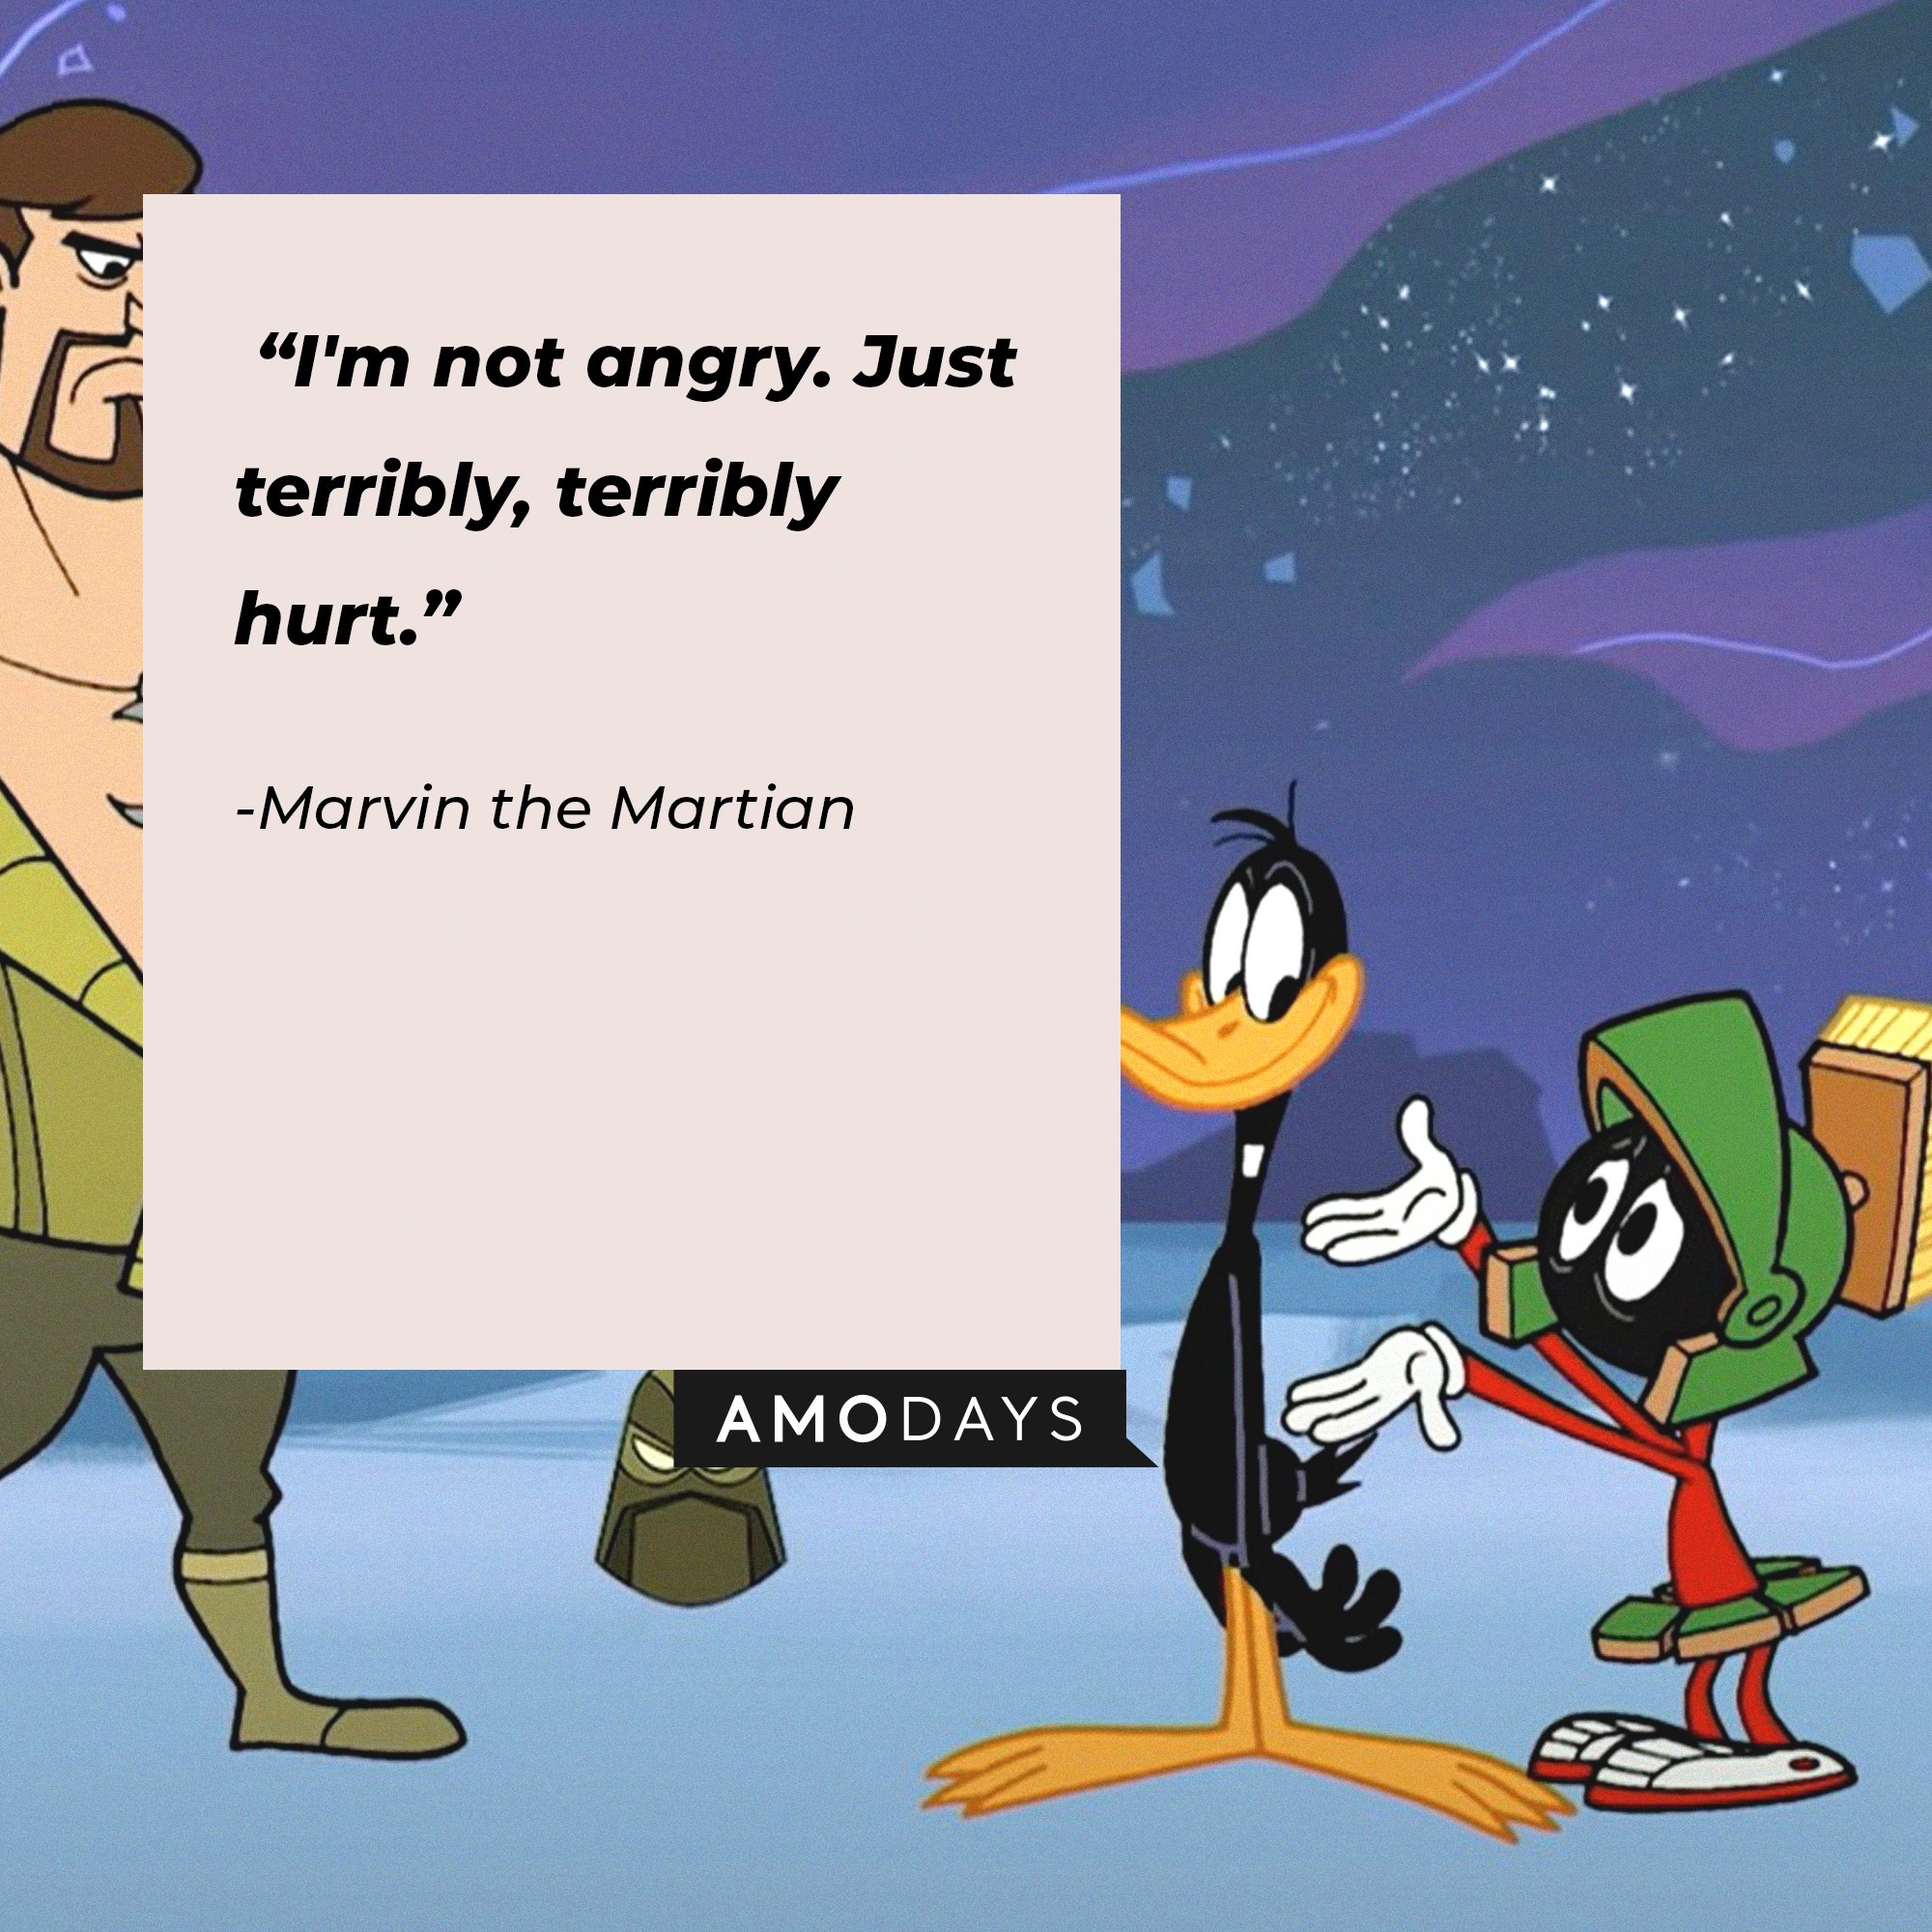  Marvin the Martian’s quote: "I'm not angry. Just terribly, terribly hurt.” | Image: AmoDays